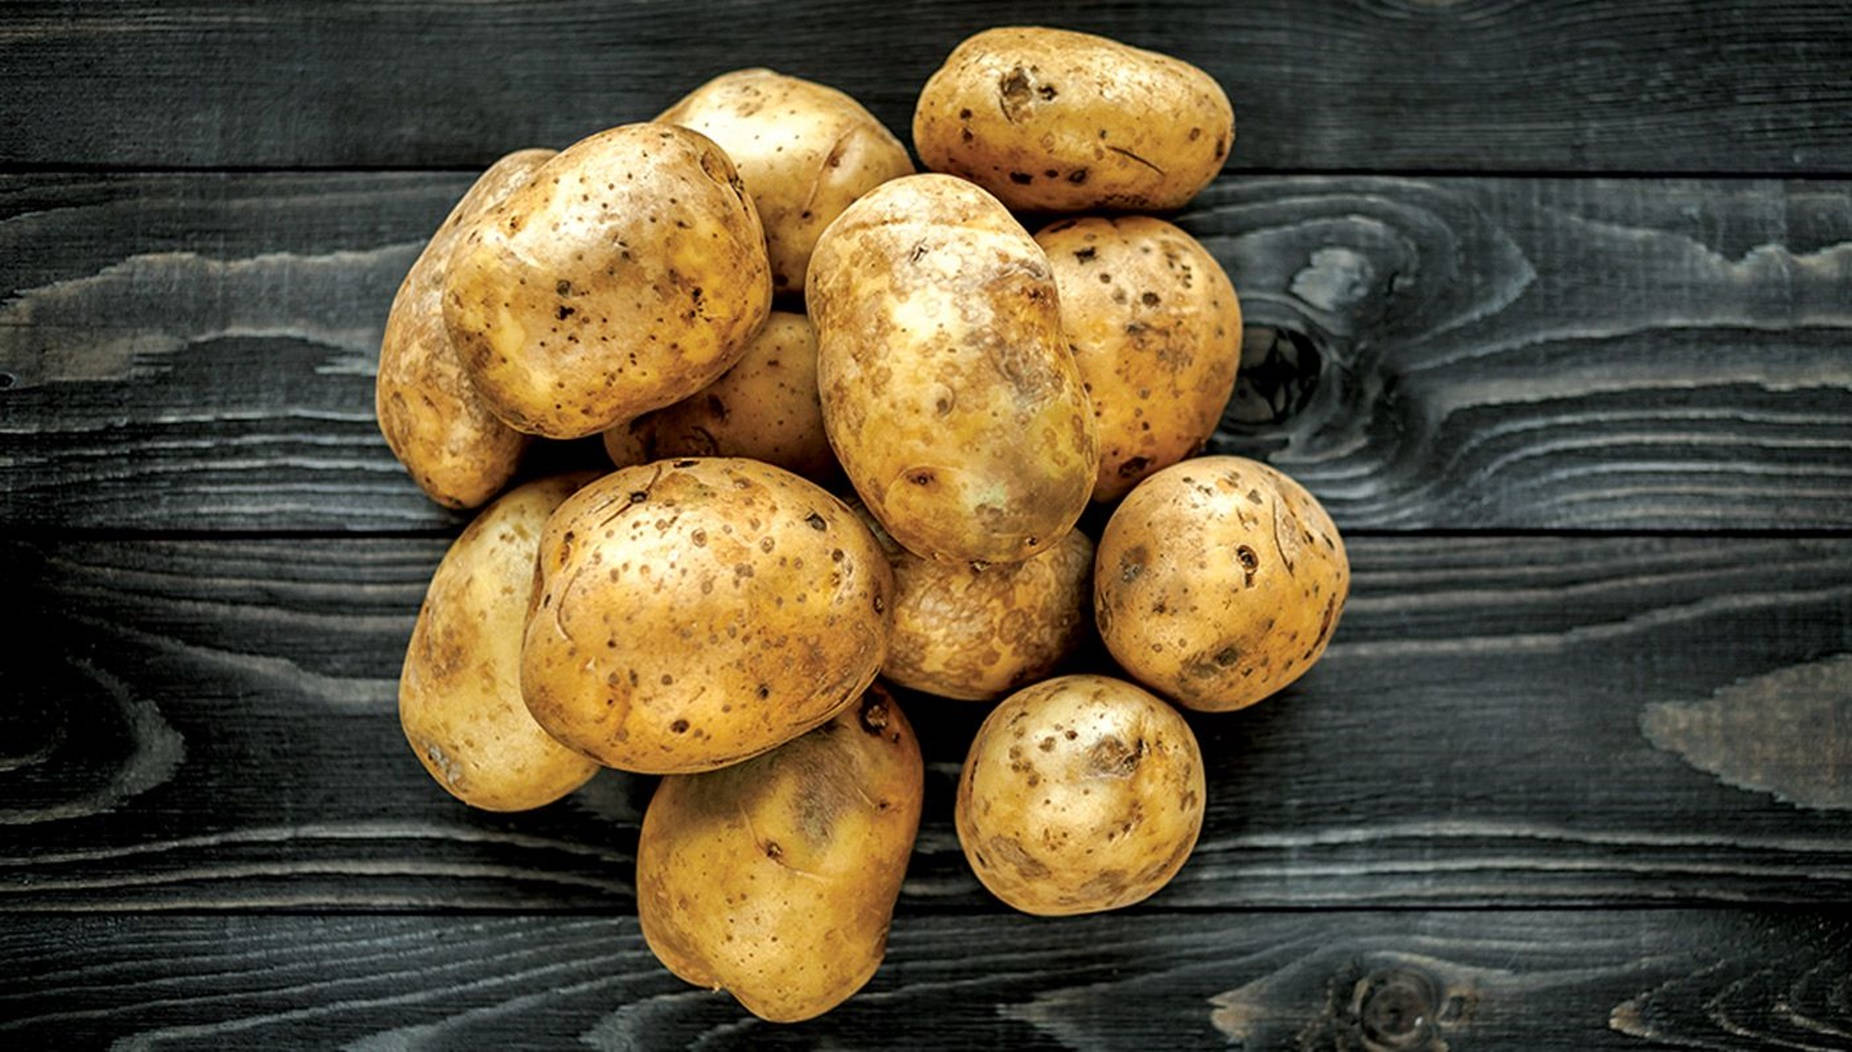 Raw Potatoes in their Natural, Uneven Shapes Wallpaper